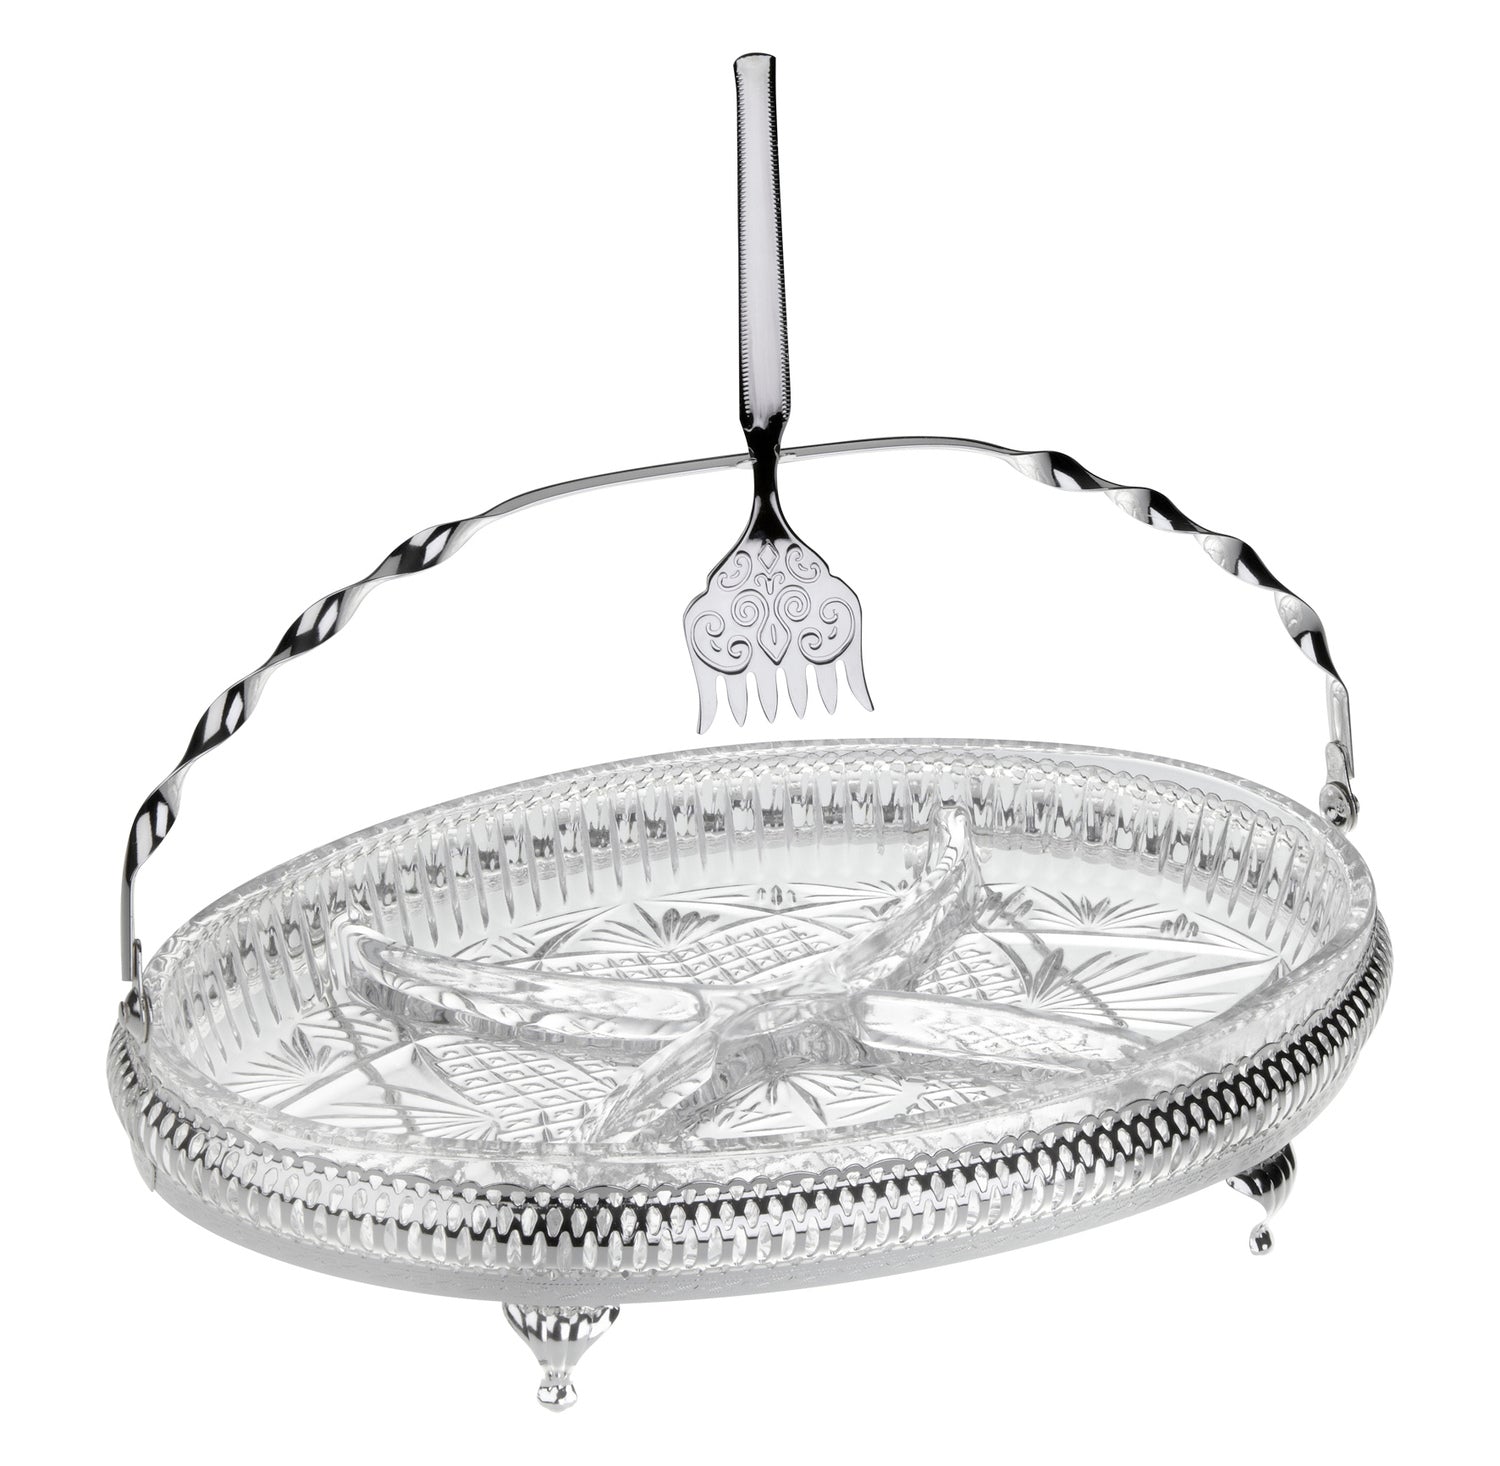 Queen Anne Hors d'oeuvre 4 Division Oval Patterned with Serving Fork -29x20cm